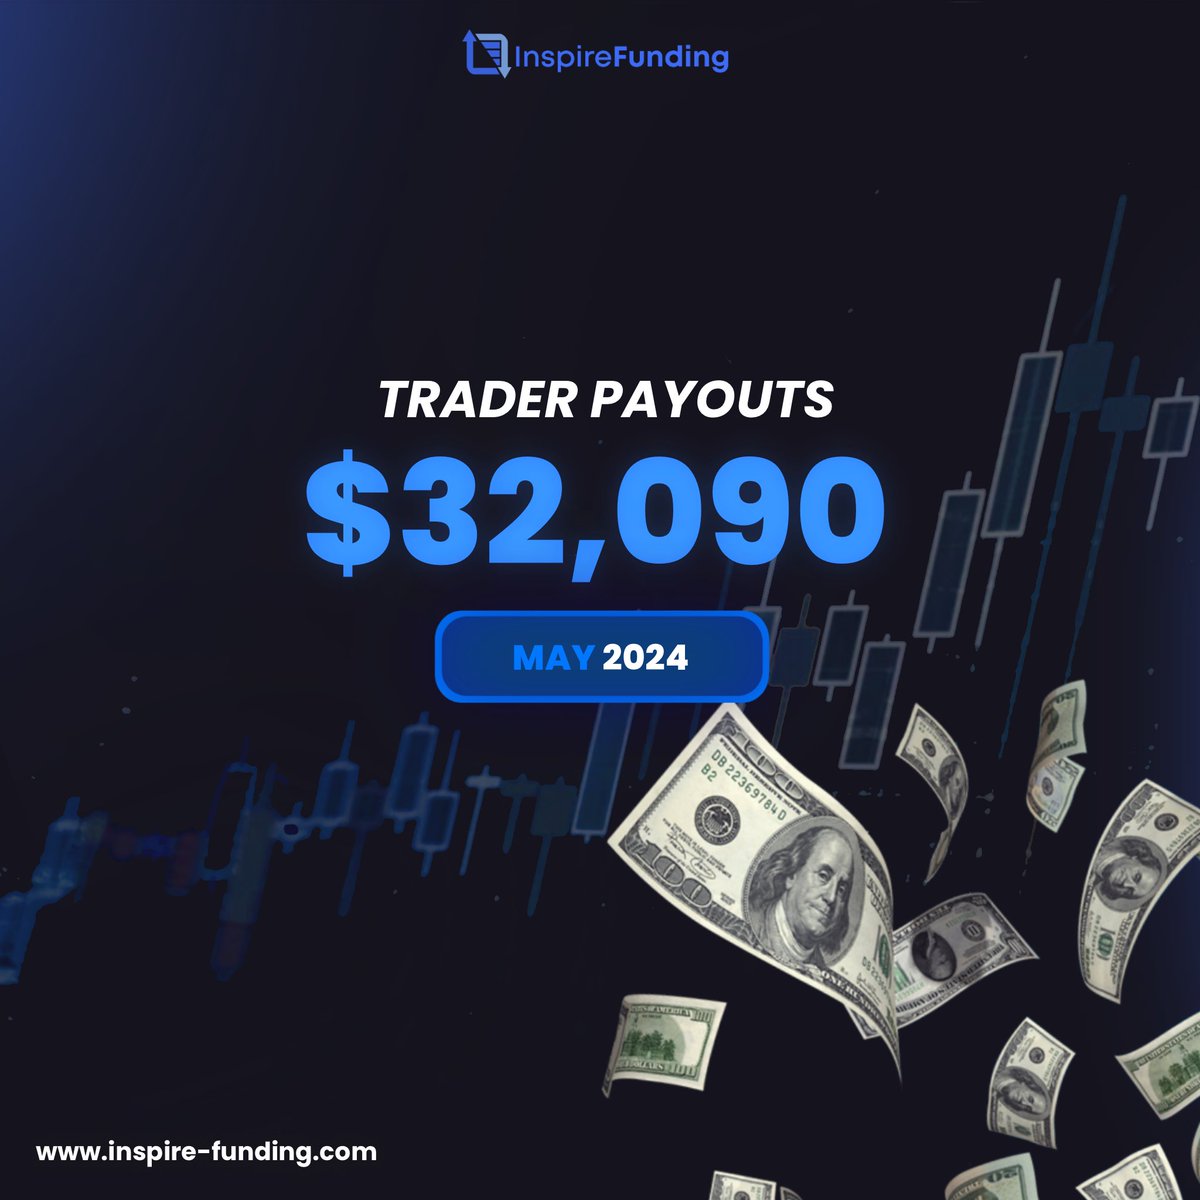 Our BIGGEST Month Yet 📈

These are our trader payouts from May, will you be next ⁉️

Our Capital, Your Profit📈
Pass an Evaluation & Receive Up to 200K in Funding

inspire-funding.com

#trading #forex #fundedtrader